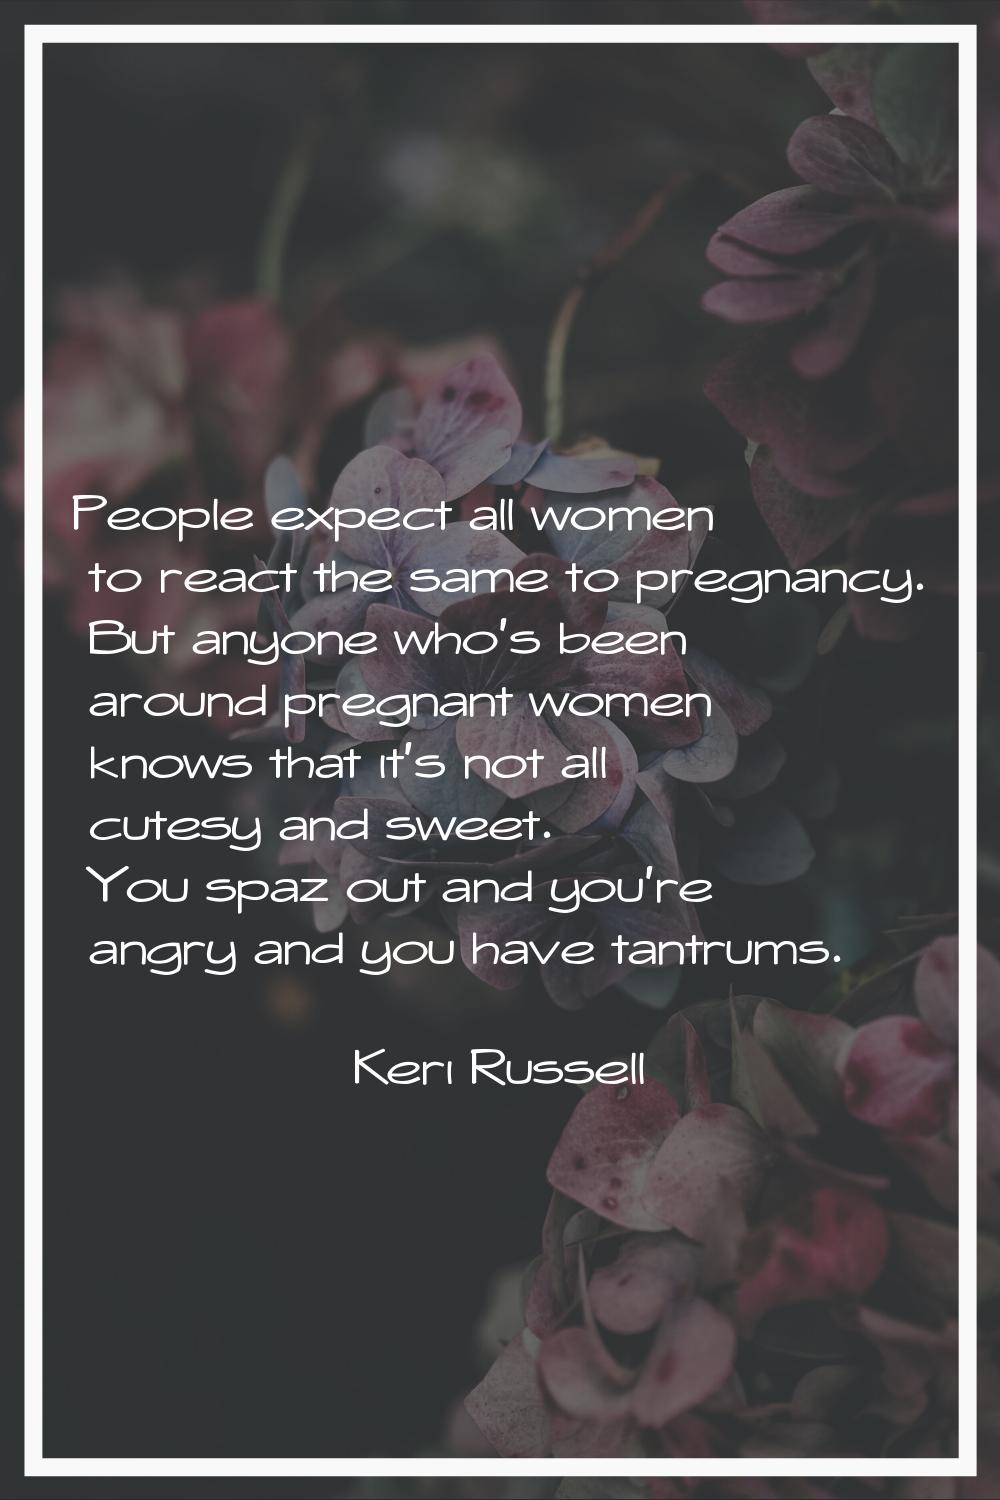 People expect all women to react the same to pregnancy. But anyone who's been around pregnant women